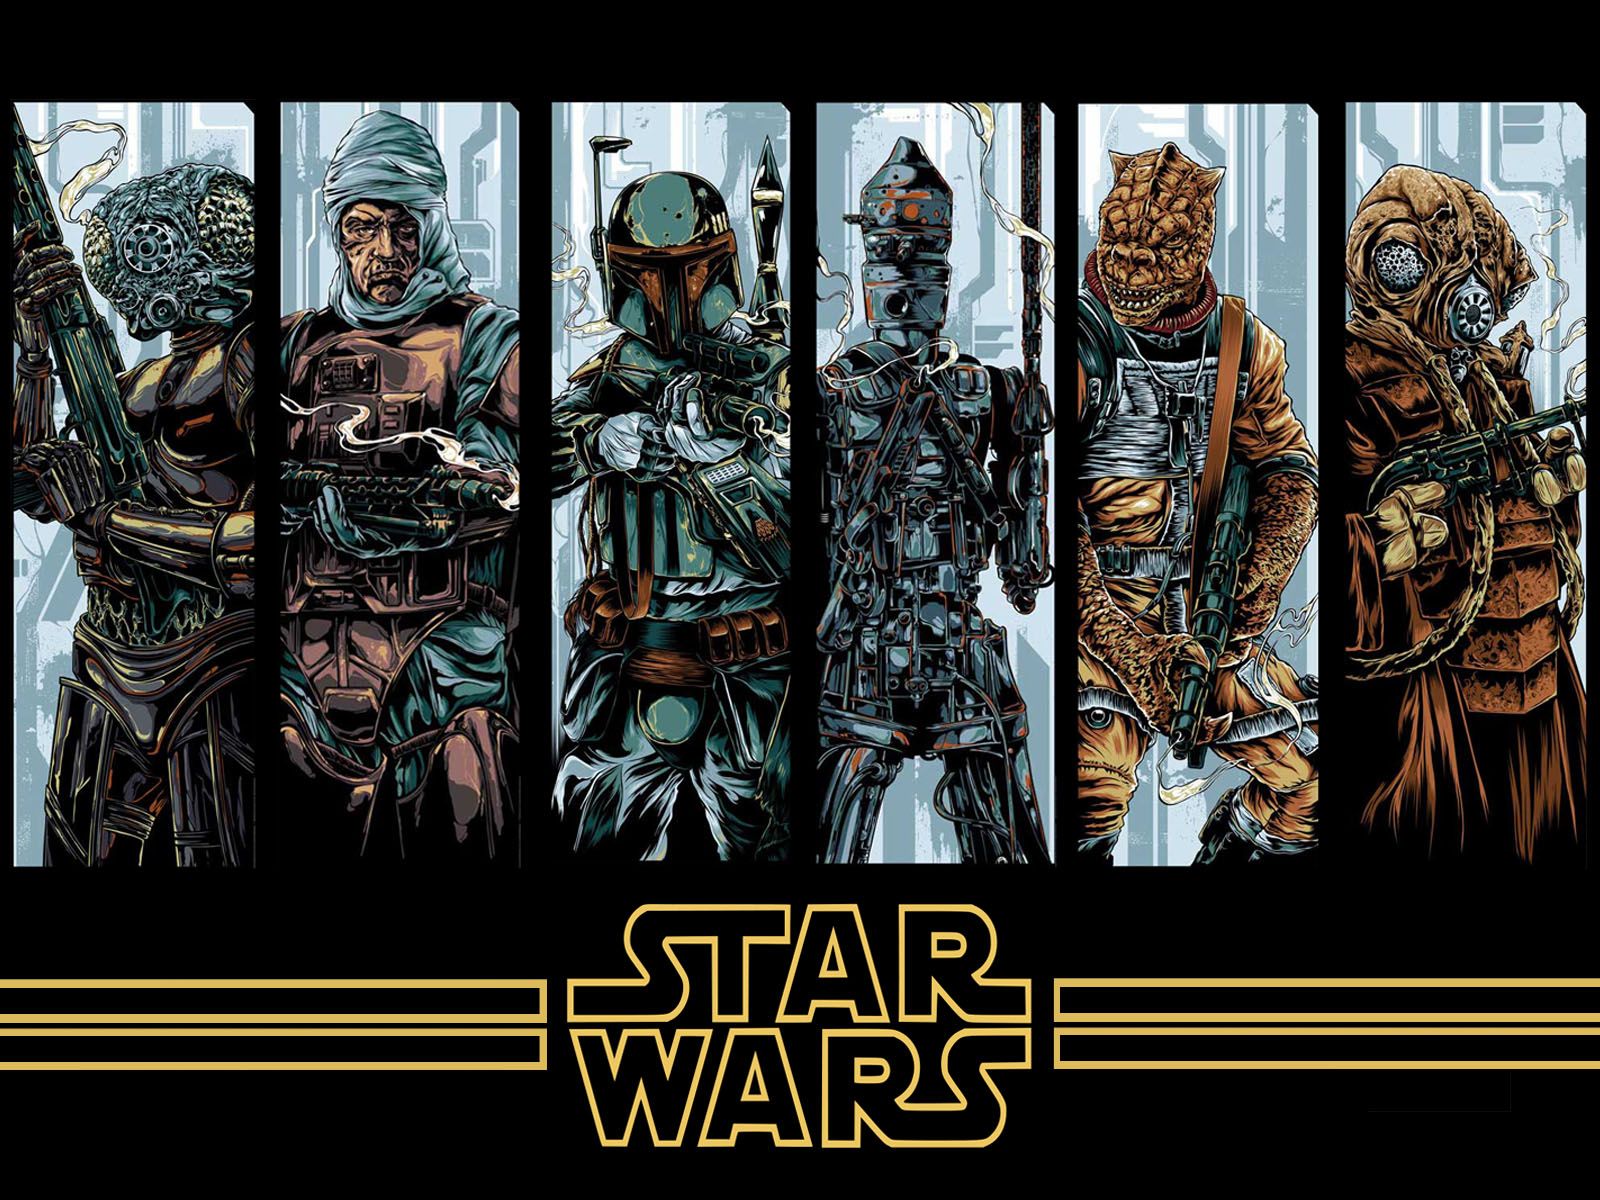 Bounty Hunters - My kind of scum - Awesome Wallpapers and Cool